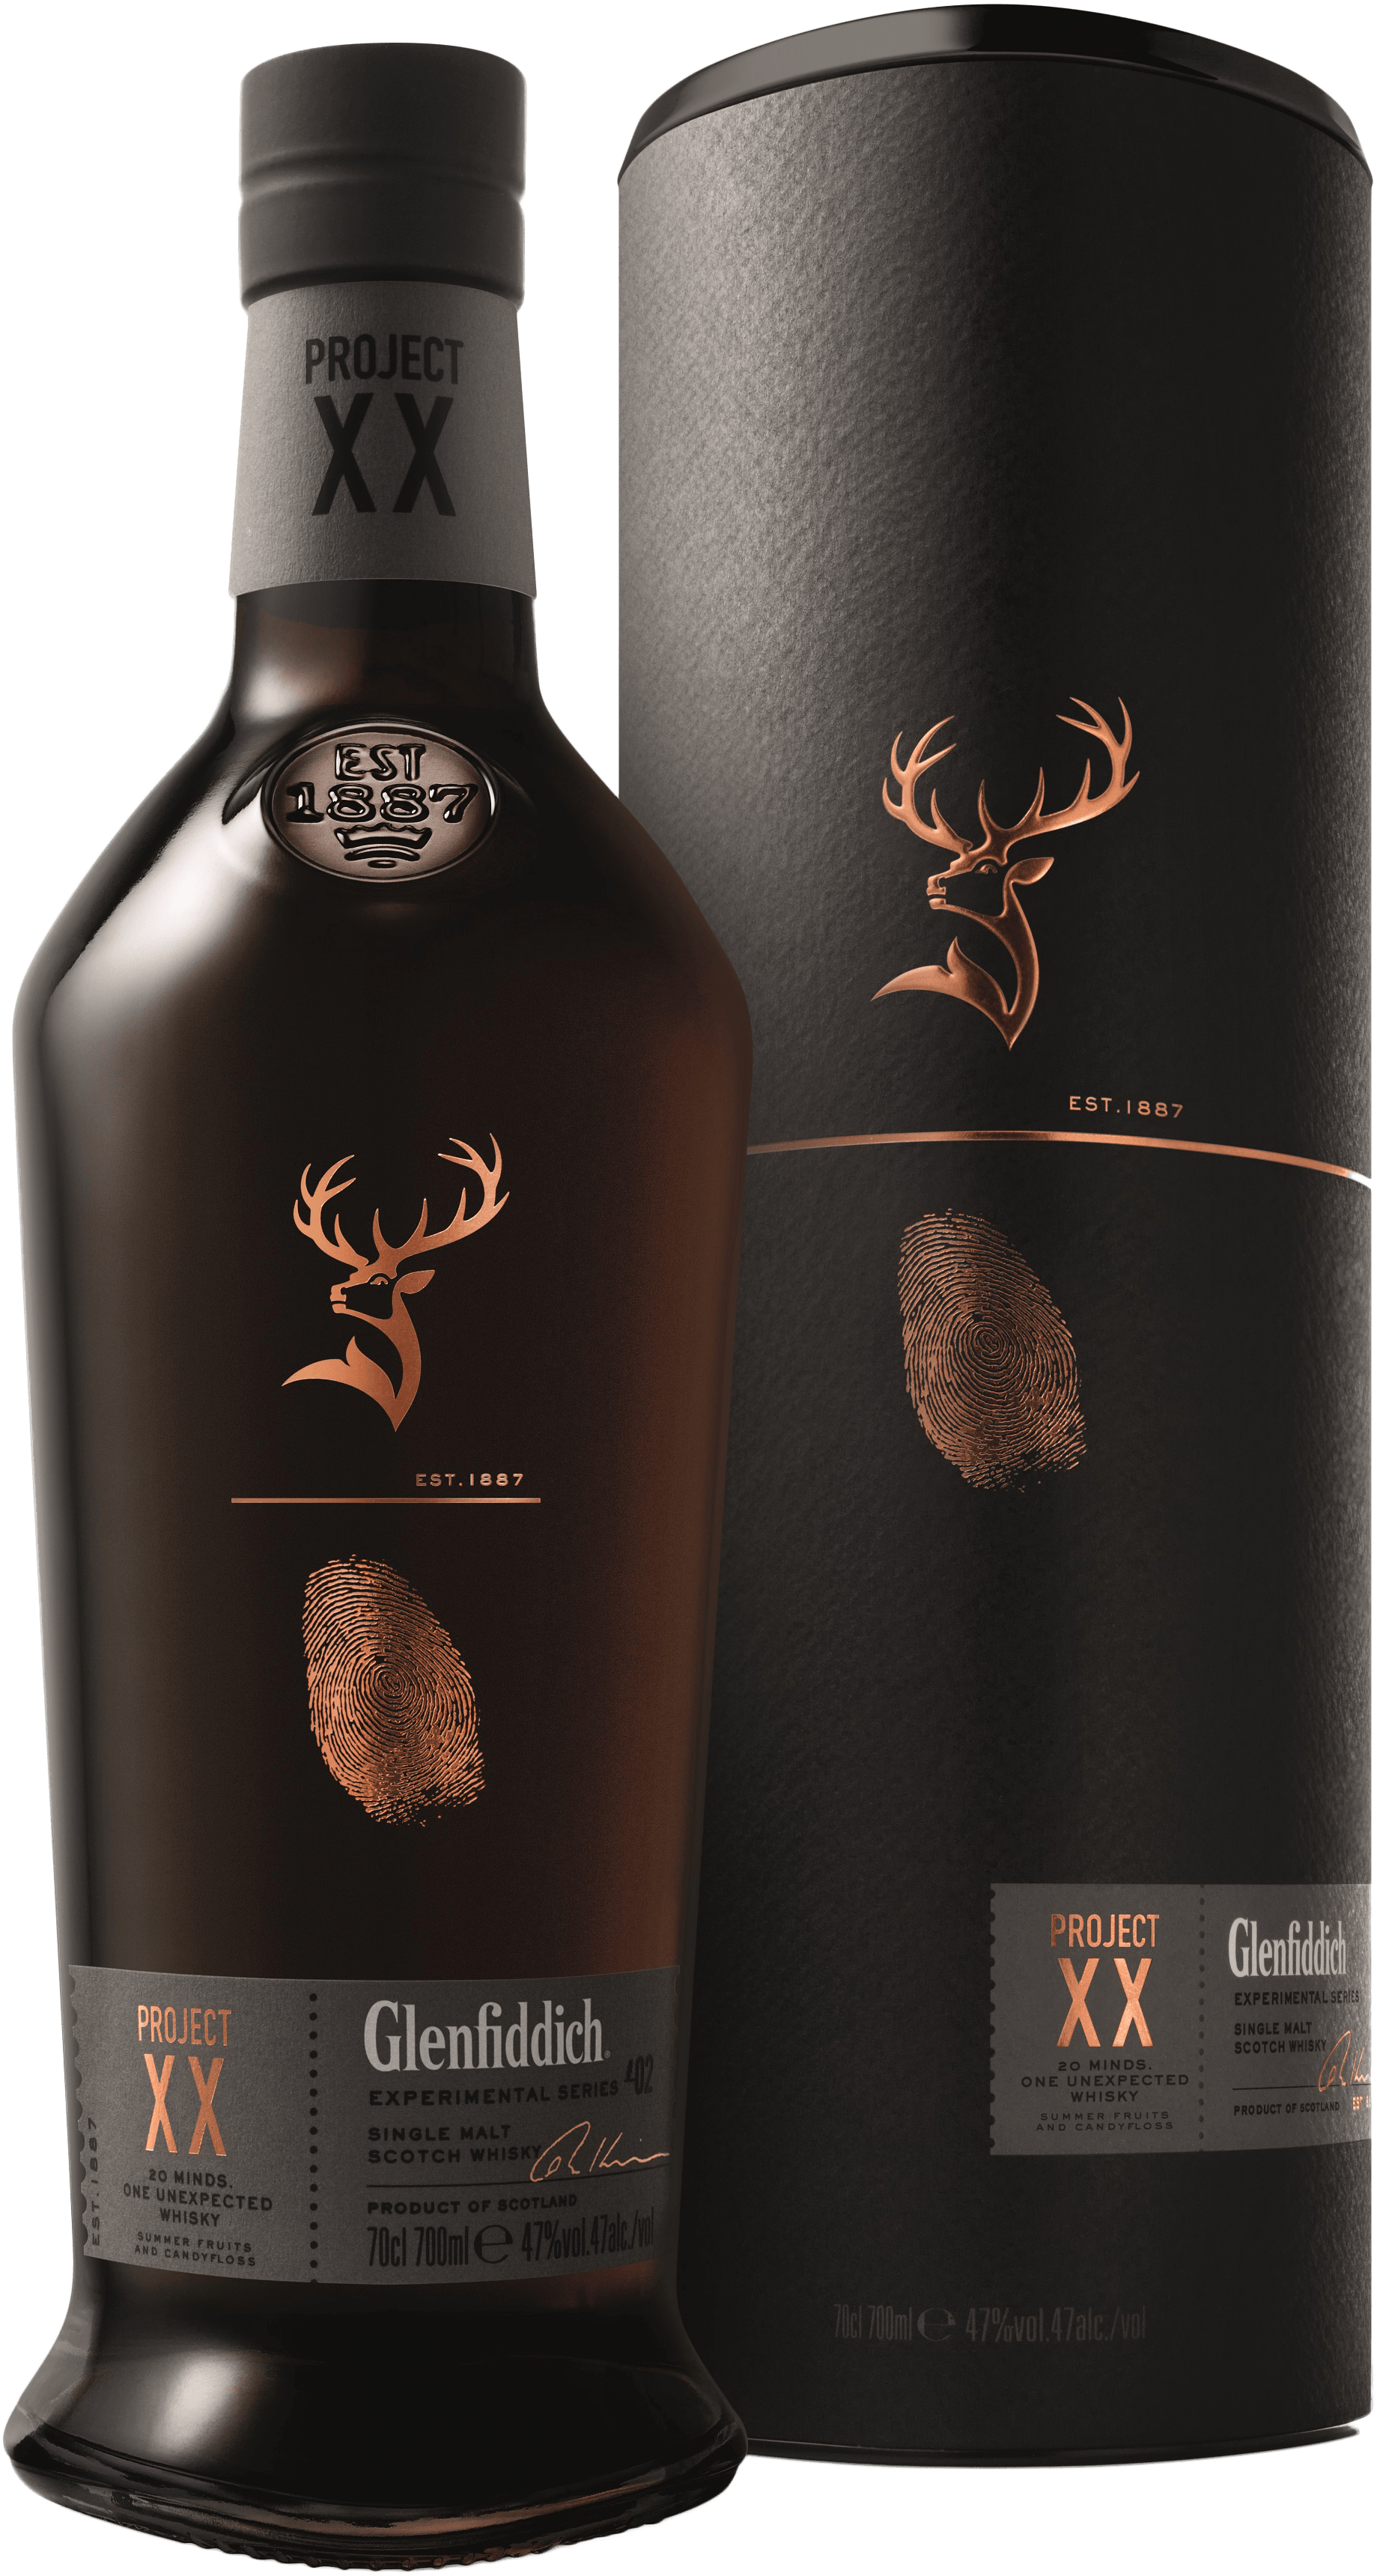 Glenfiddich Project XX Whisky 02 47%